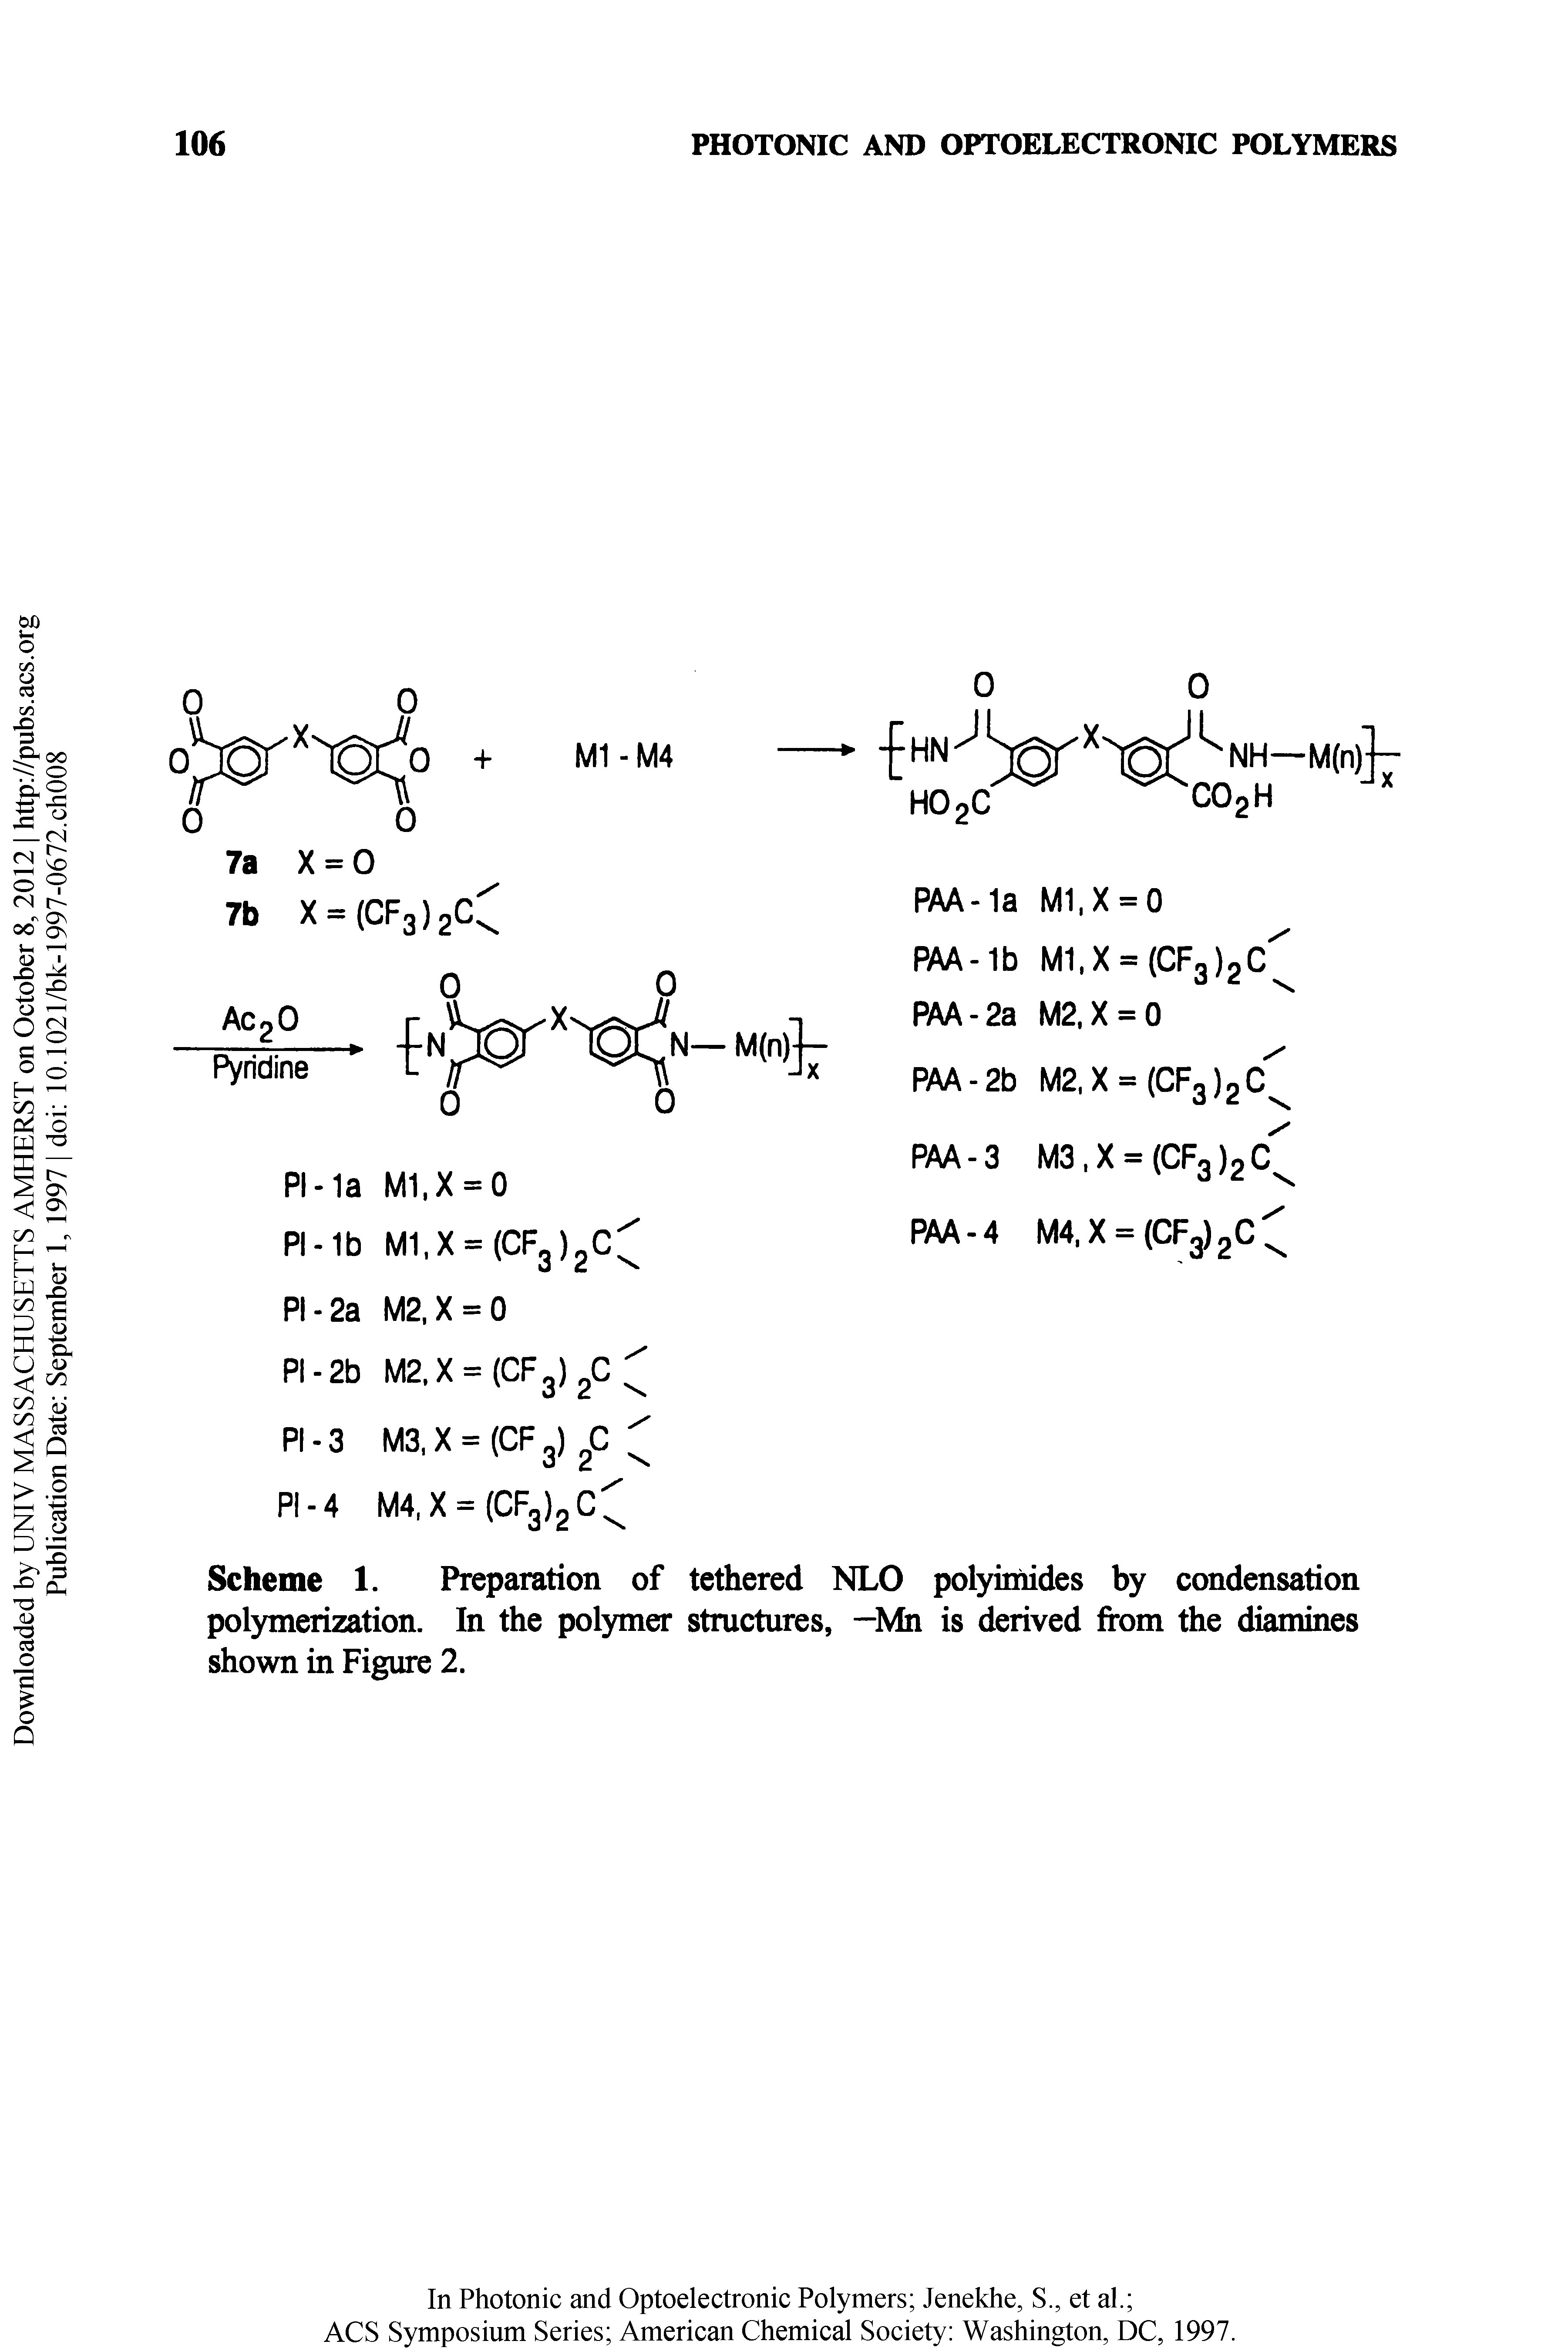 Scheme 1. Preparation of tethered NLO polyimides by condensation polymerization. In the polymer structures, -Mn is derived from the diamines shown in Figure 2.